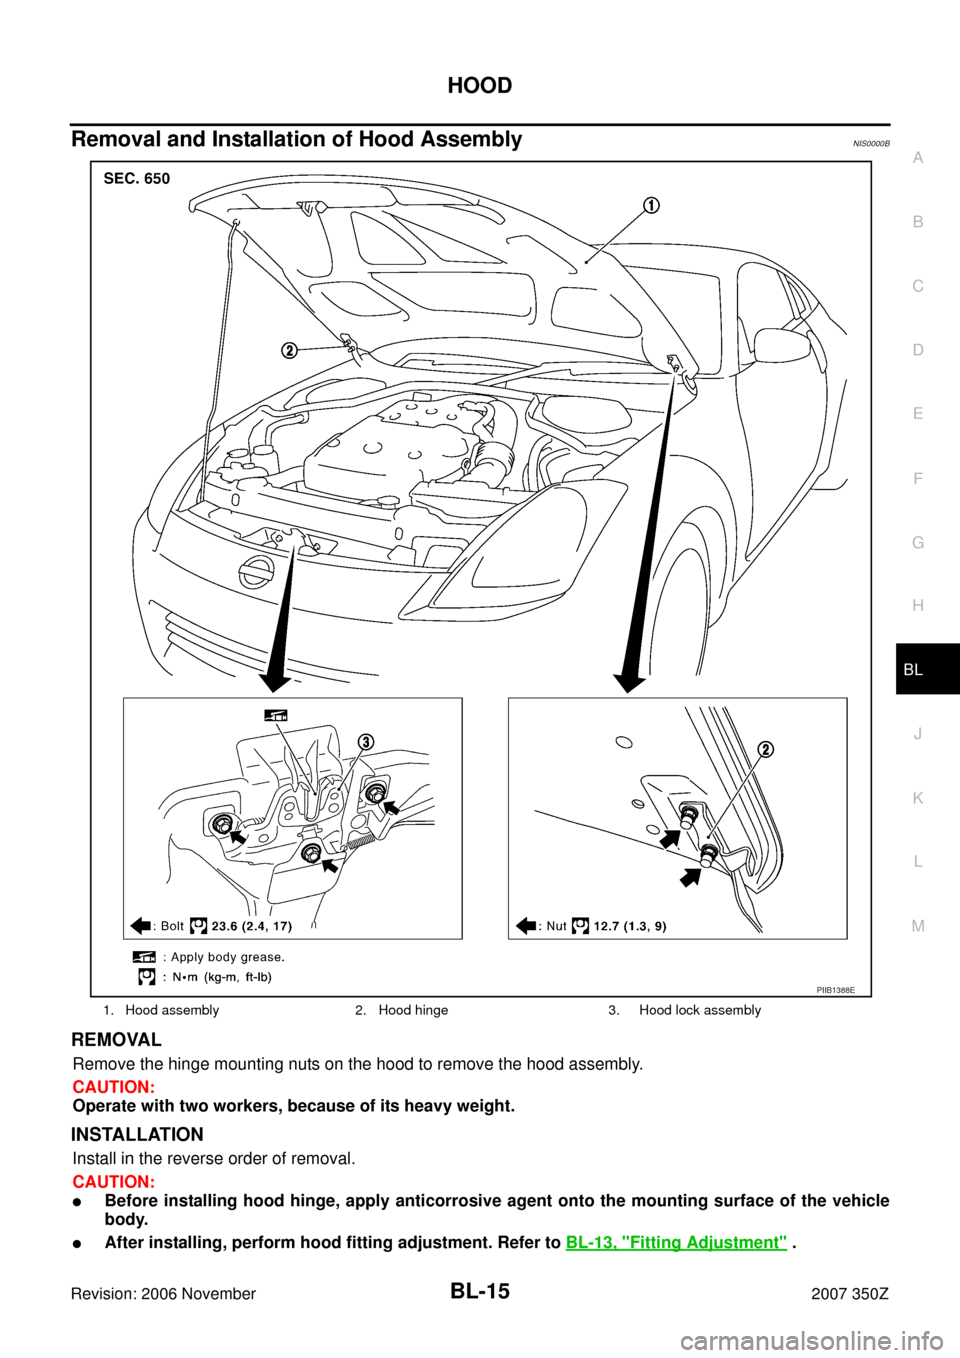 NISSAN 350Z 2007 Z33 Body, Lock And Security System User Guide HOOD
BL-15
C
D
E
F
G
H
J
K
L
MA
B
BL
Revision: 2006 November2007 350Z
Removal and Installation of Hood AssemblyNIS0000B
REMOVAL
Remove the hinge mounting nuts on the hood to remove the hood assembly.
